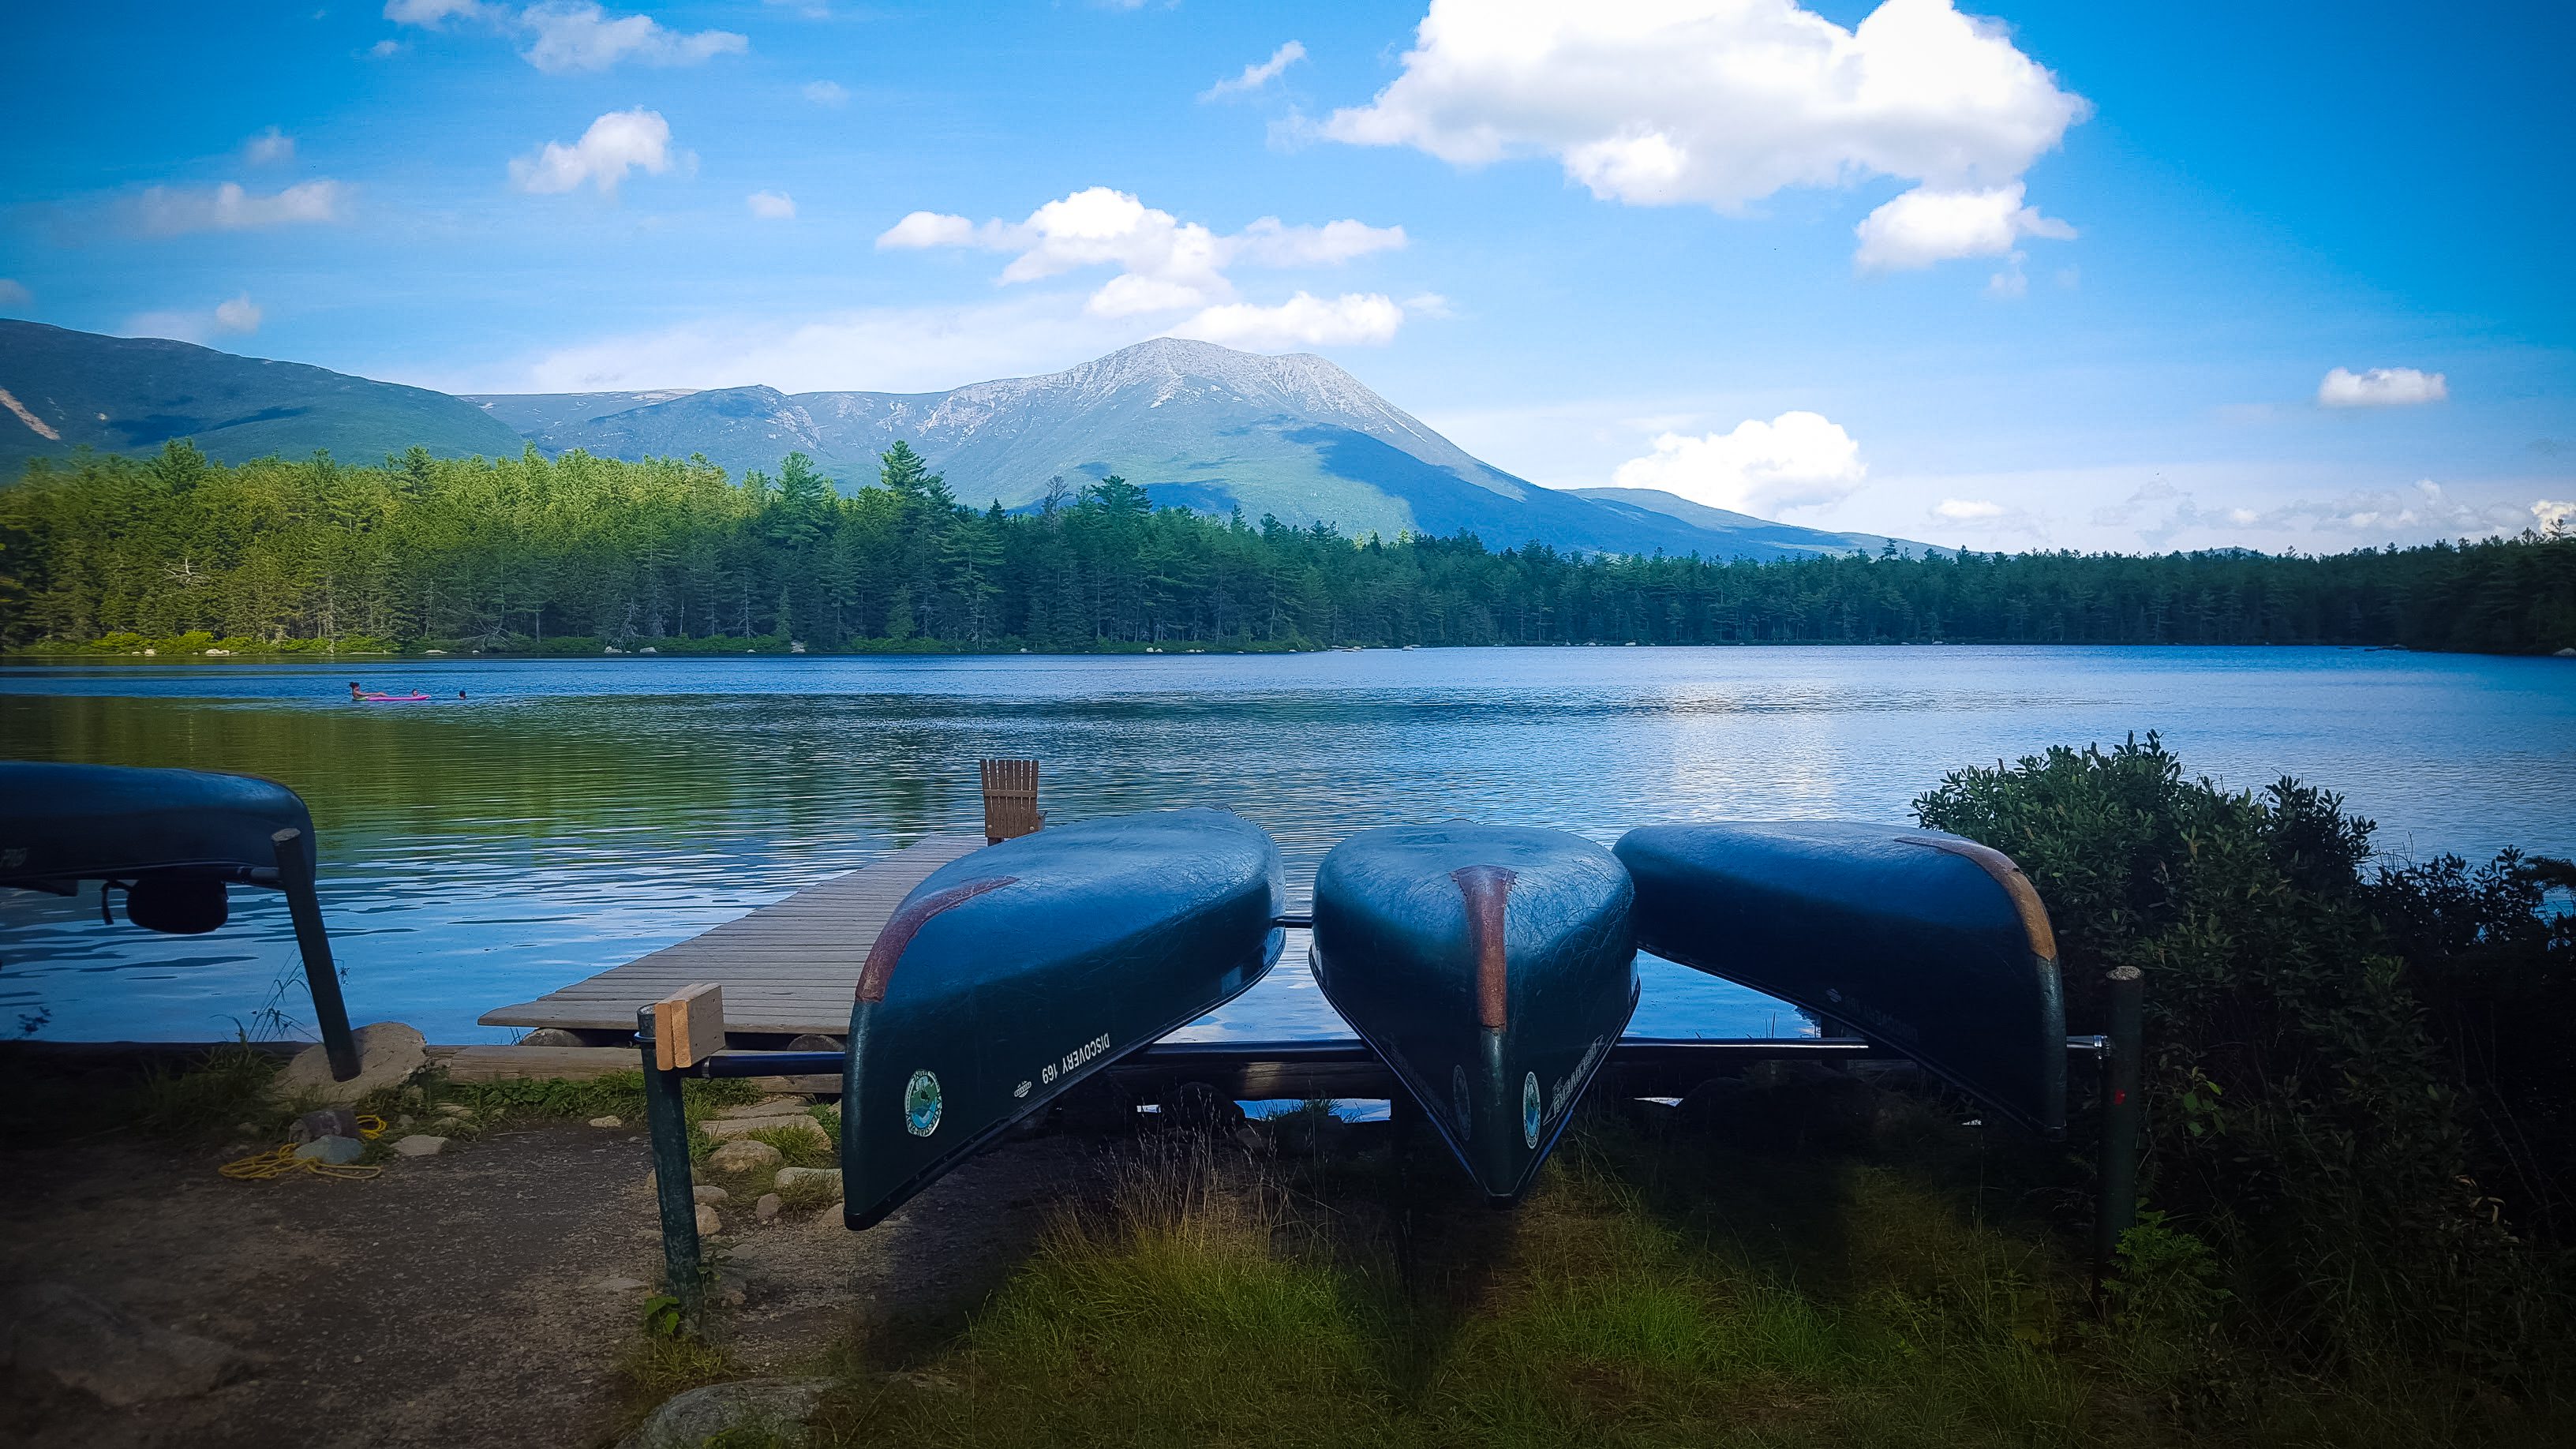 You are currently viewing Canoeing on Daicey Pond in Baxter State Park